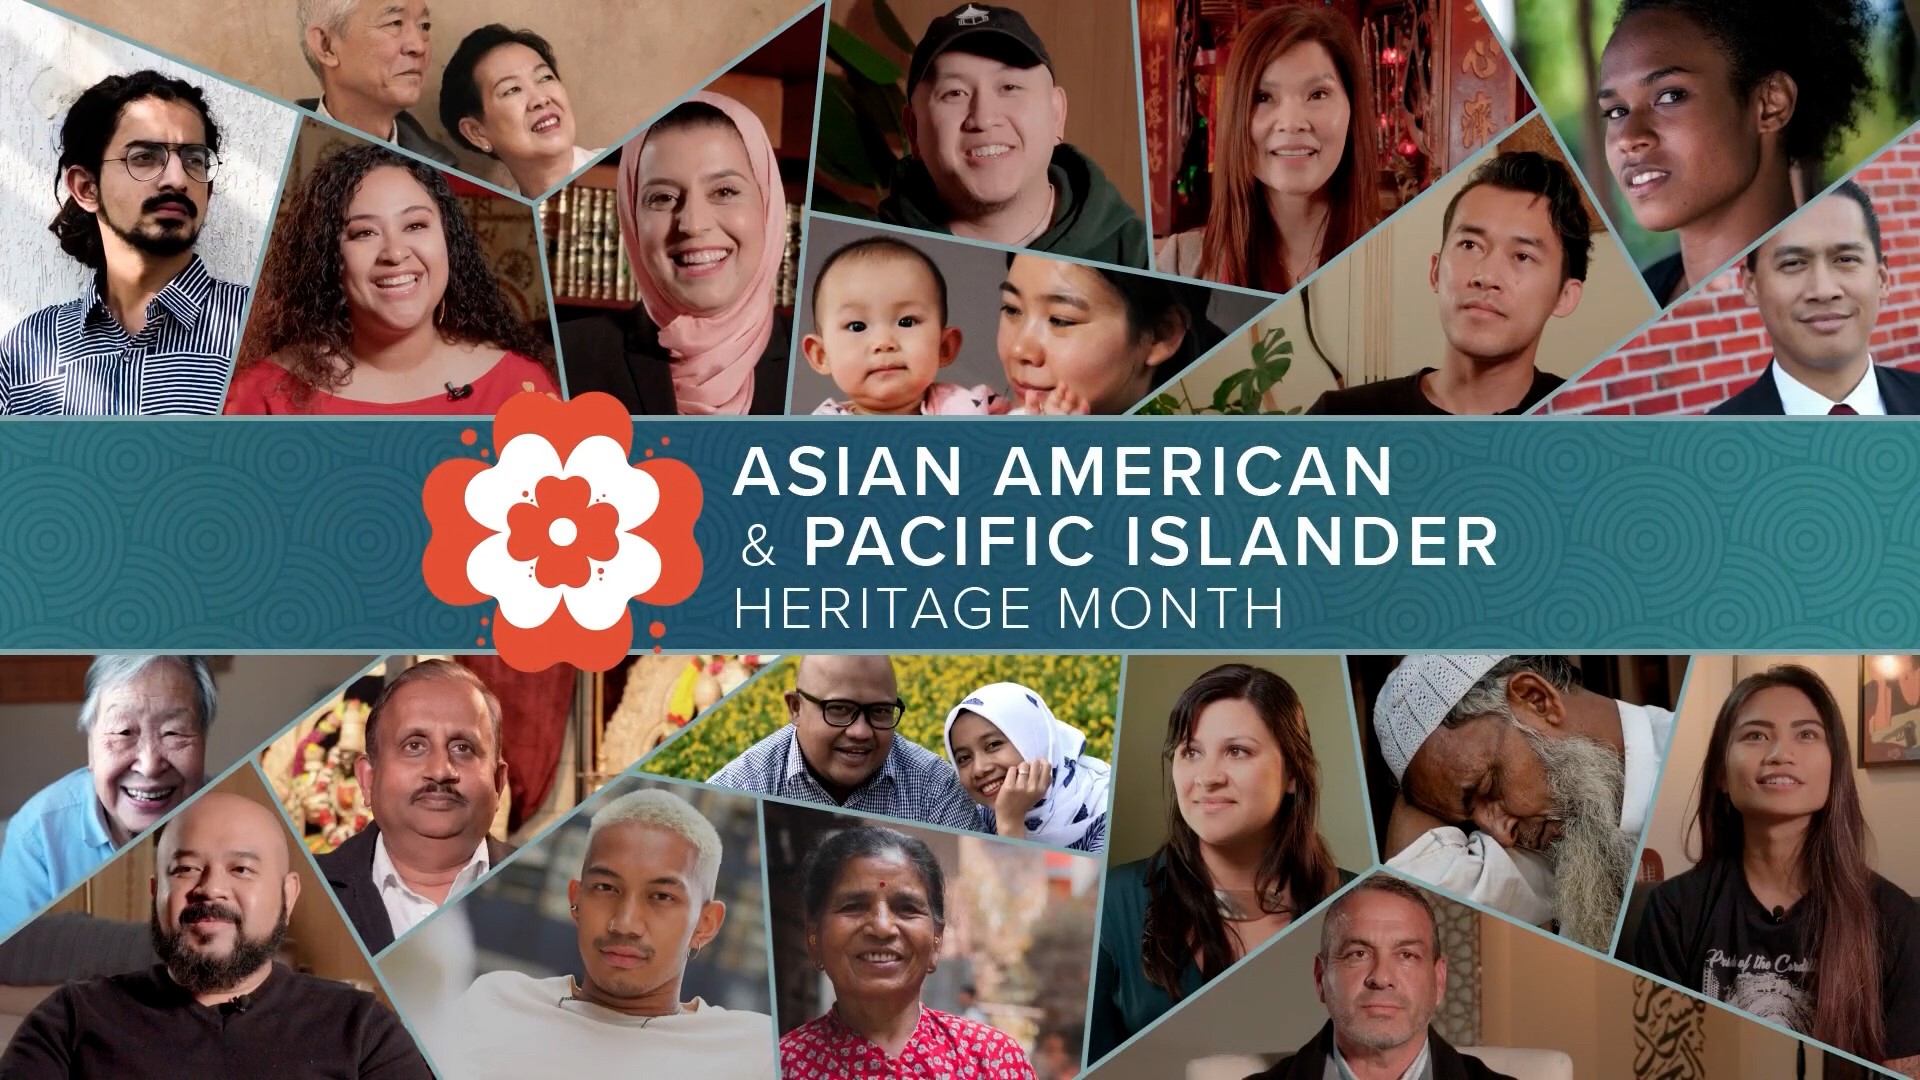 This is the month of celebrating and learning about the people and culture of Asian Americans and Pacific Islanders.